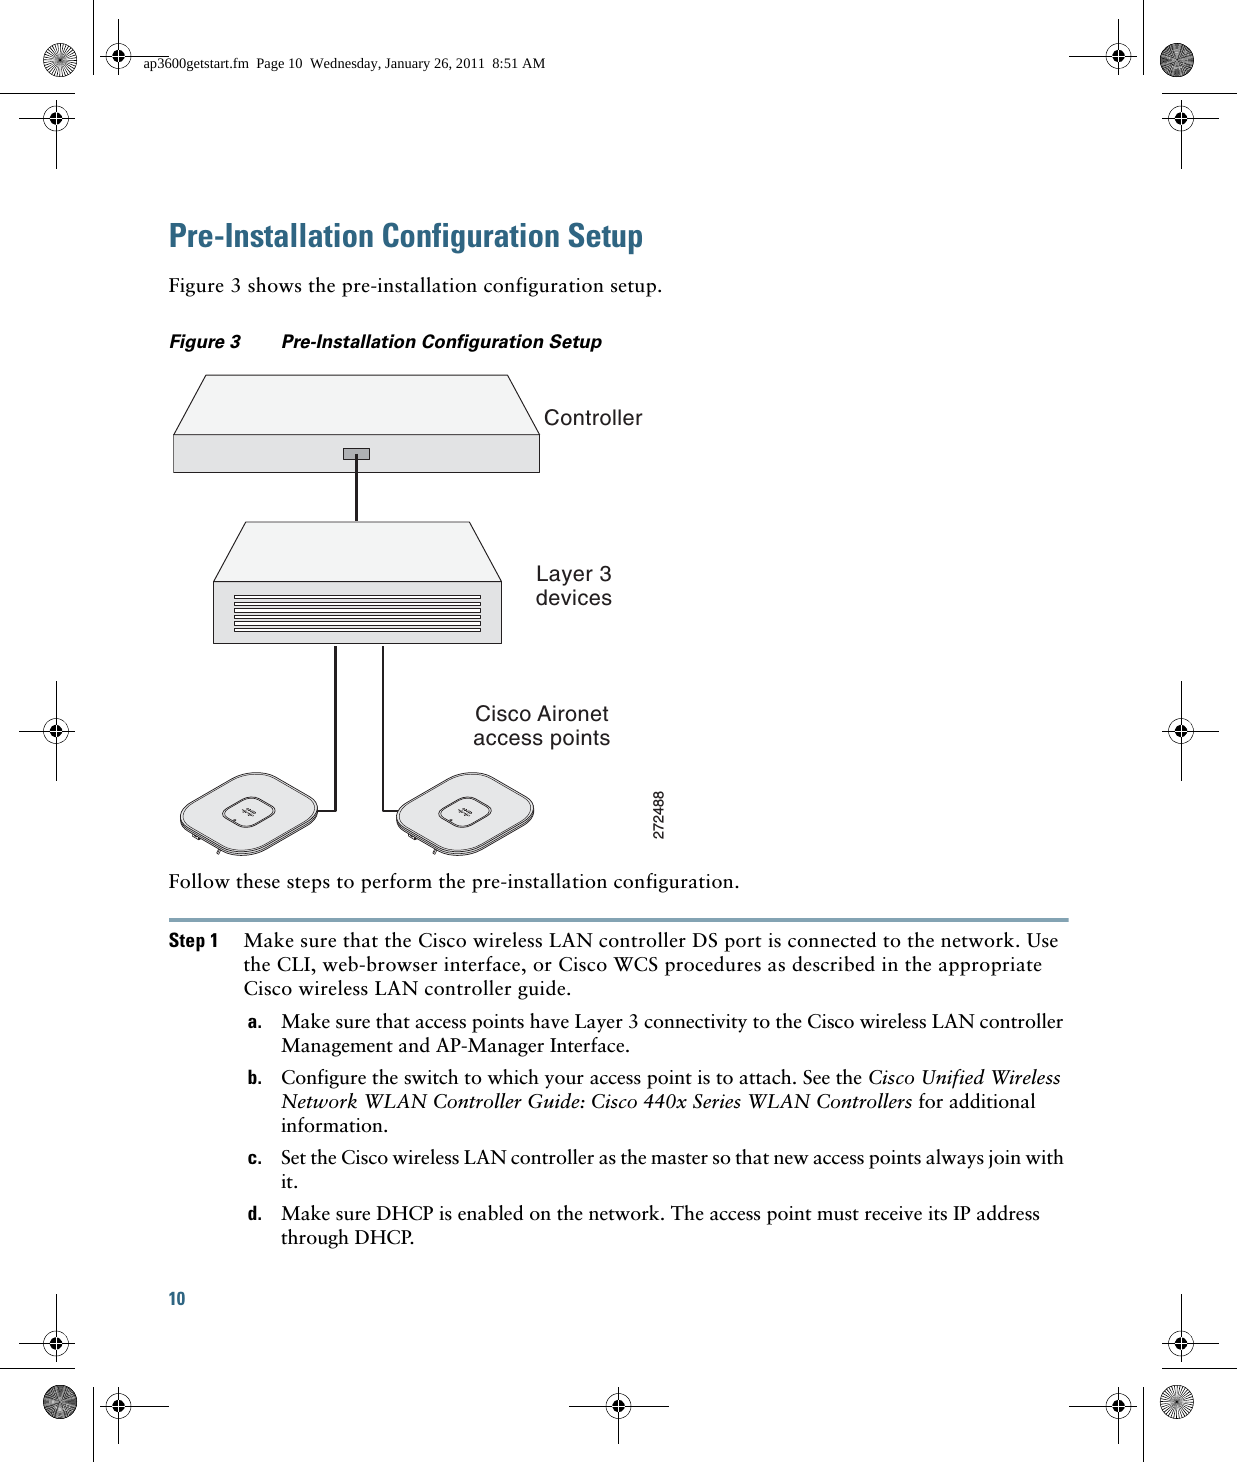 10 Pre-Installation Configuration SetupFigure 3 shows the pre-installation configuration setup.Figure 3 Pre-Installation Configuration Setup Follow these steps to perform the pre-installation configuration.Step 1 Make sure that the Cisco wireless LAN controller DS port is connected to the network. Use the CLI, web-browser interface, or Cisco WCS procedures as described in the appropriate Cisco wireless LAN controller guide.a. Make sure that access points have Layer 3 connectivity to the Cisco wireless LAN controller Management and AP-Manager Interface.b. Configure the switch to which your access point is to attach. See the Cisco Unified Wireless Network WLAN Controller Guide: Cisco 440x Series WLAN Controllers for additional information.c. Set the Cisco wireless LAN controller as the master so that new access points always join with it.d. Make sure DHCP is enabled on the network. The access point must receive its IP address through DHCP.ControllerLayer 3devicesCisco Aironetaccess points272488ap3600getstart.fm  Page 10  Wednesday, January 26, 2011  8:51 AM